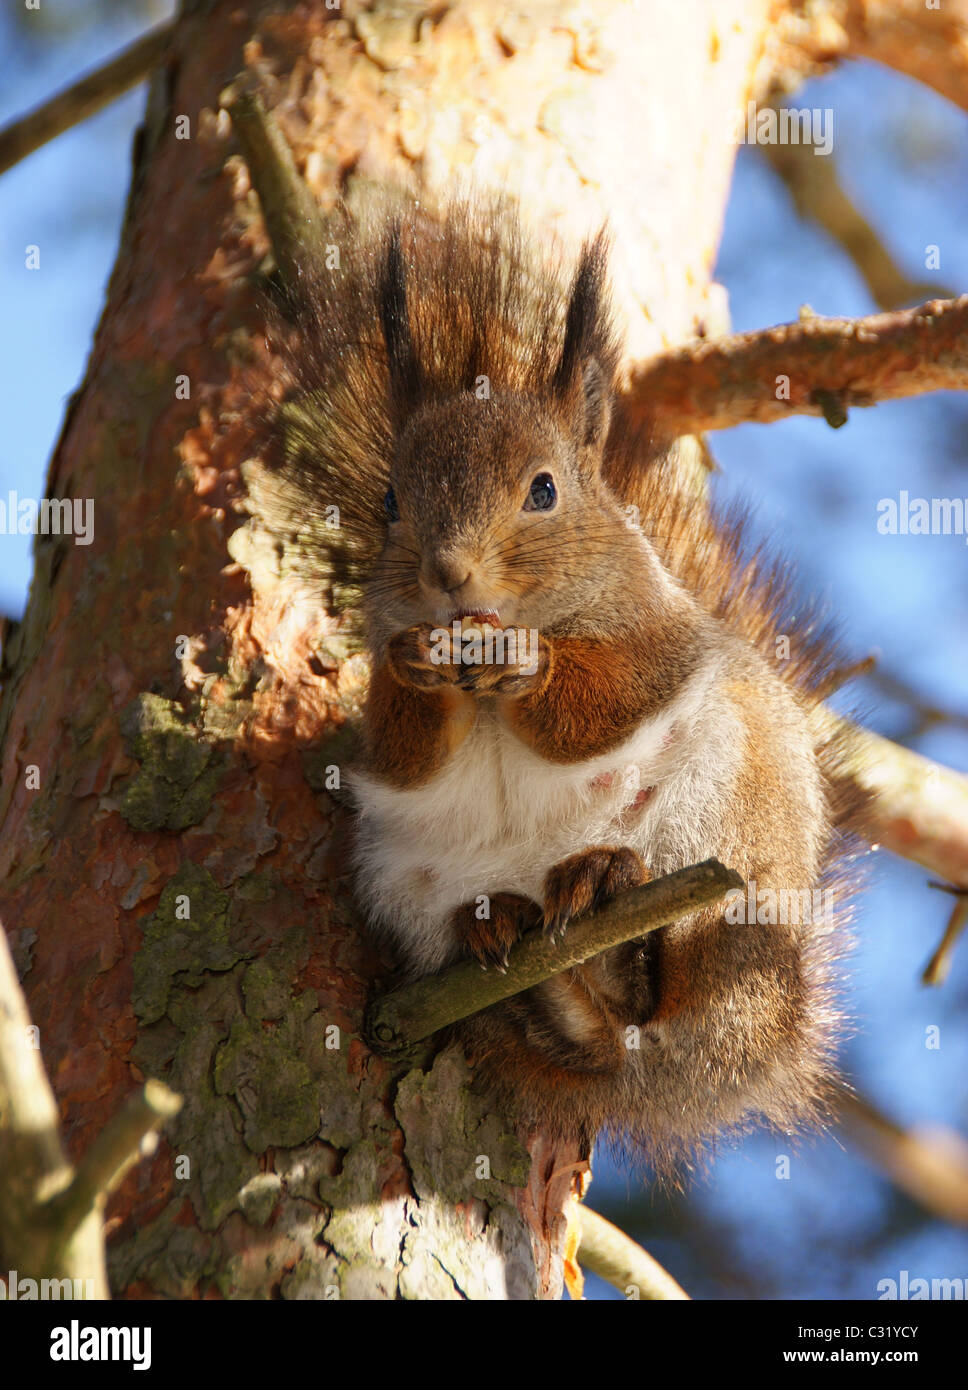 squirrel sits on a tree and gnaws a nut Stock Photo